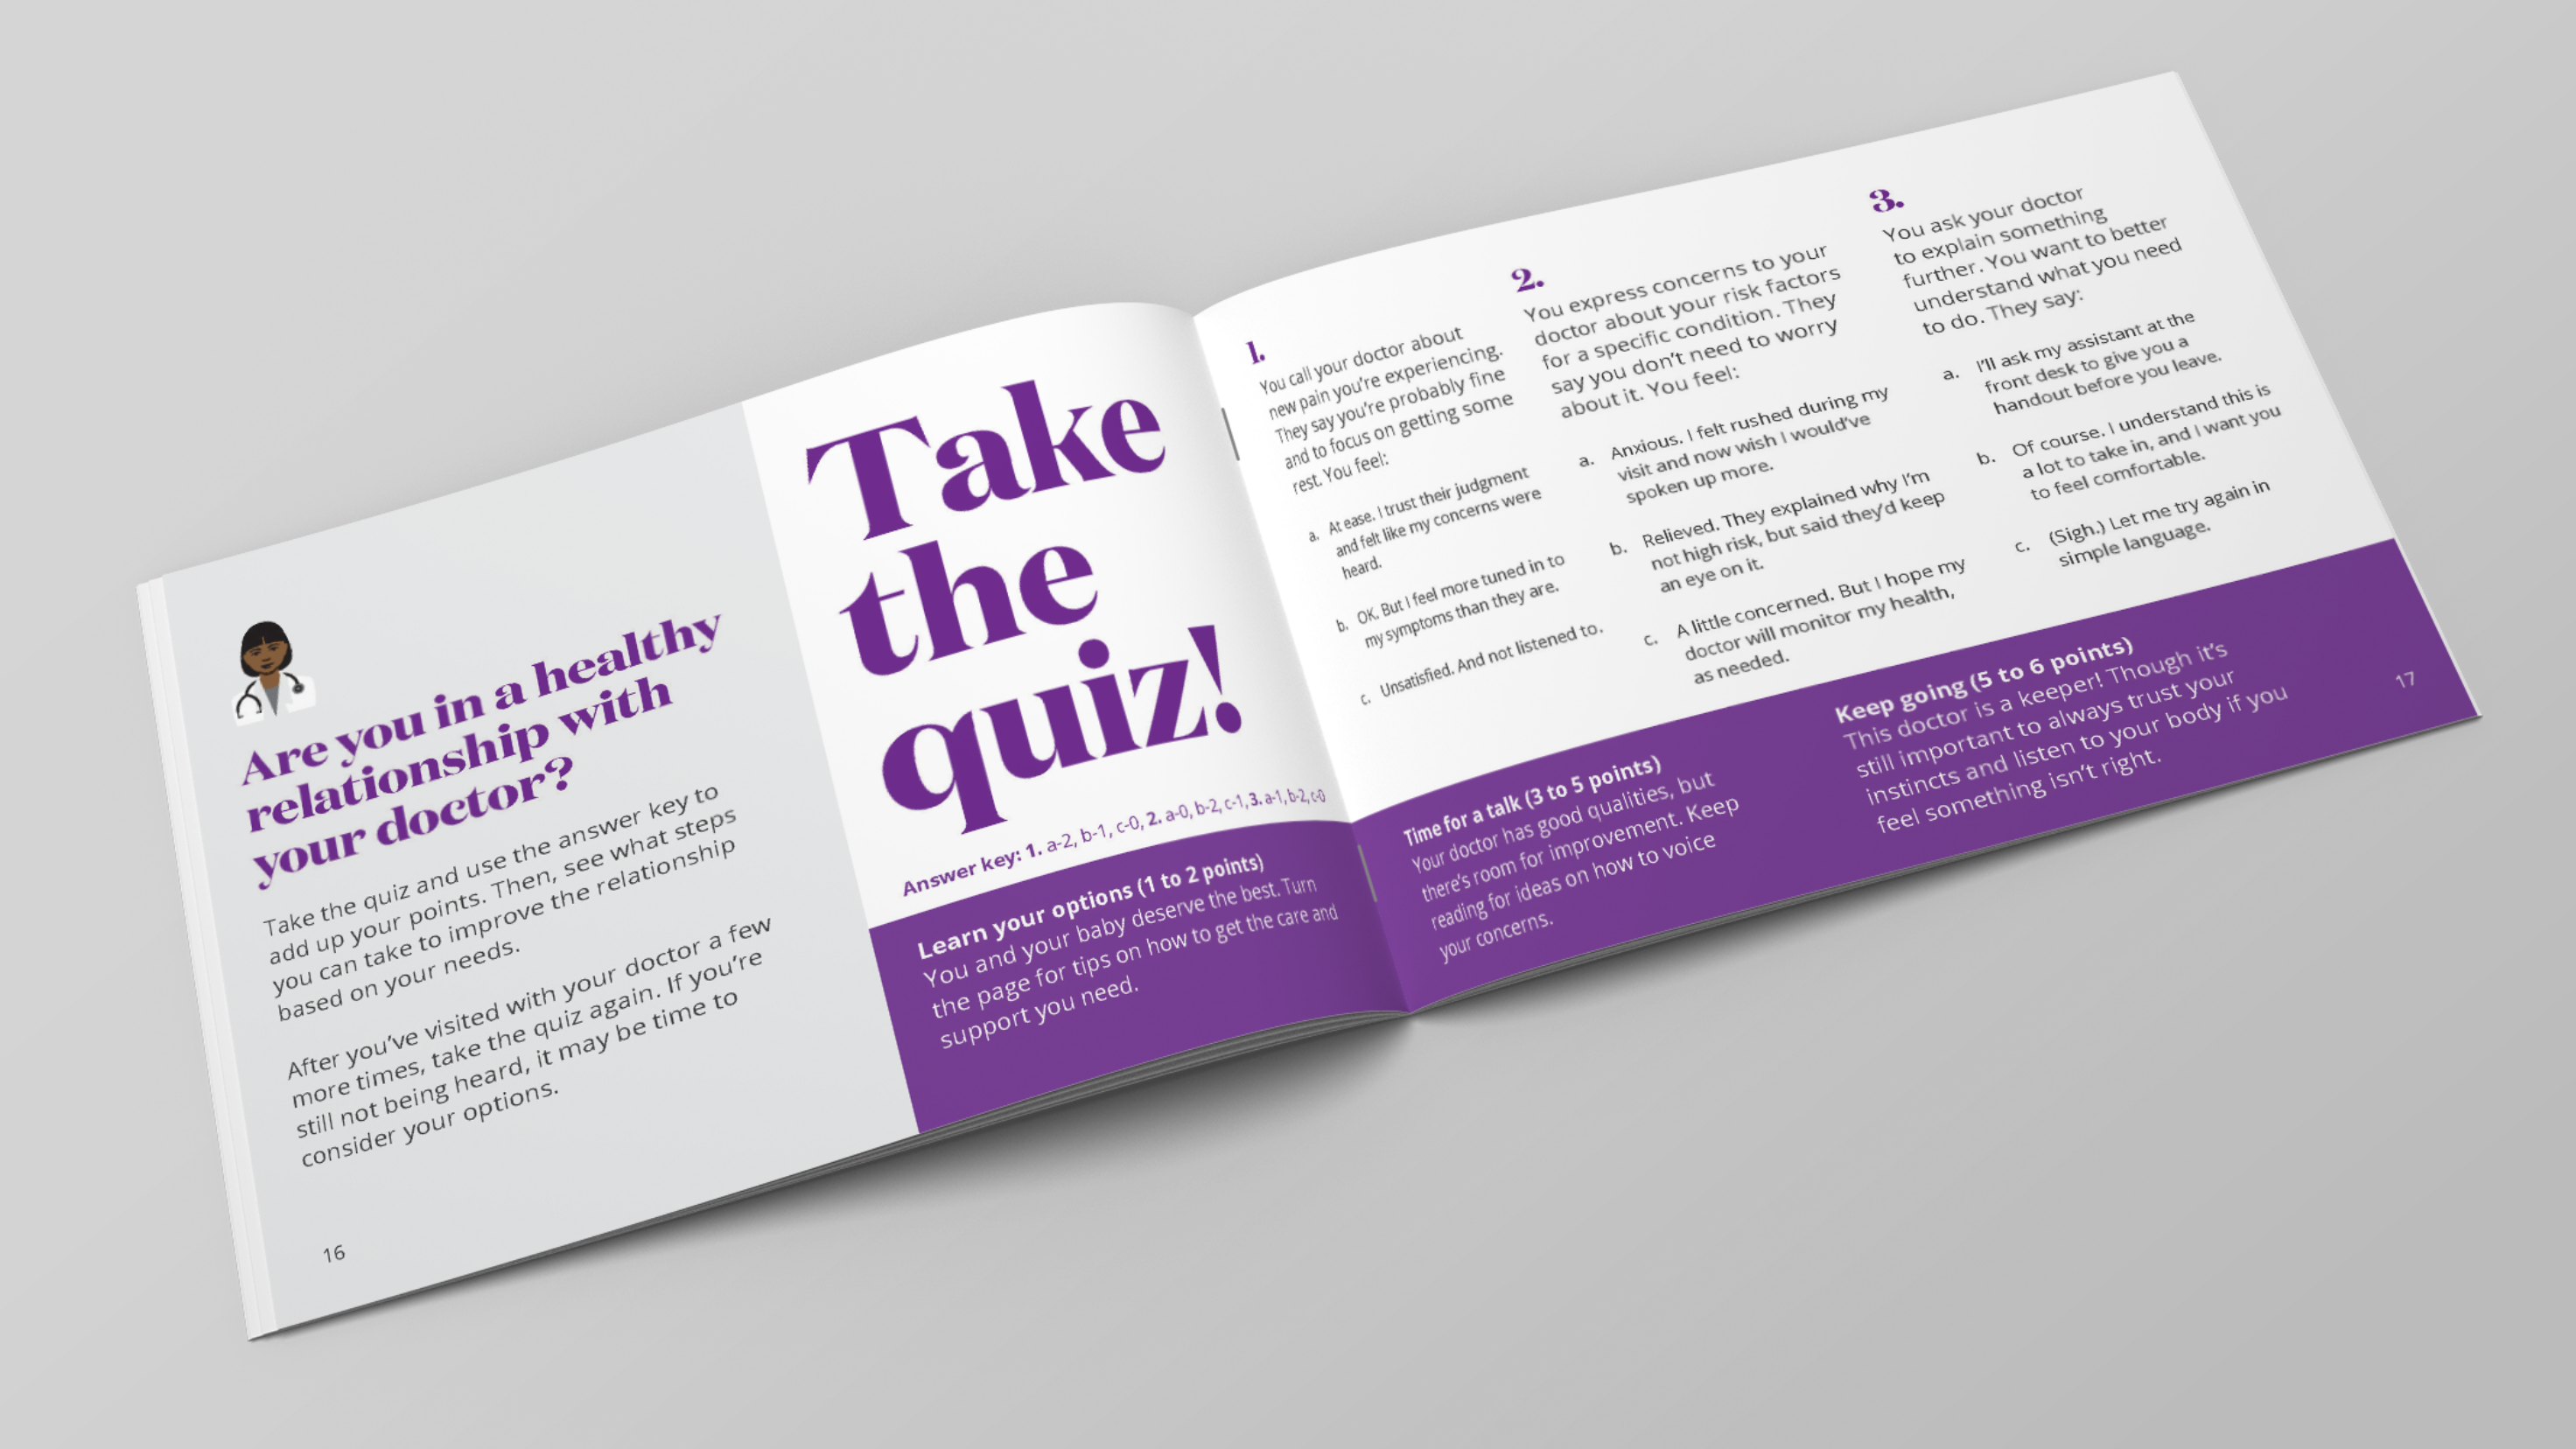 "Take the quiz" heading within the booklet for expecting parents.